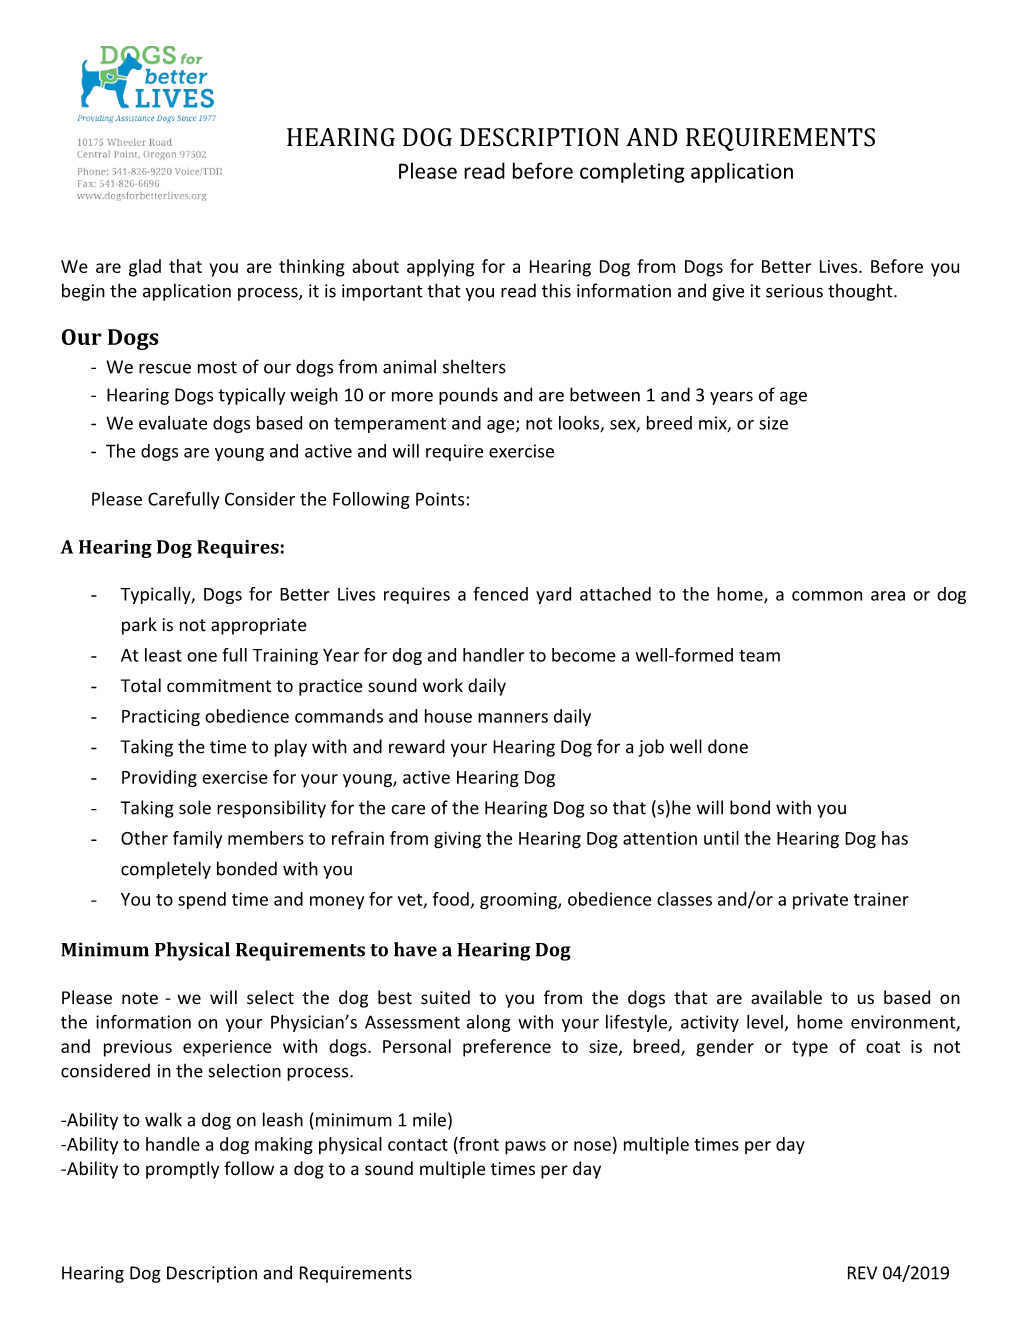 HEARING DOG DESCRIPTION and REQUIREMENTS Please Read Before Completing Application